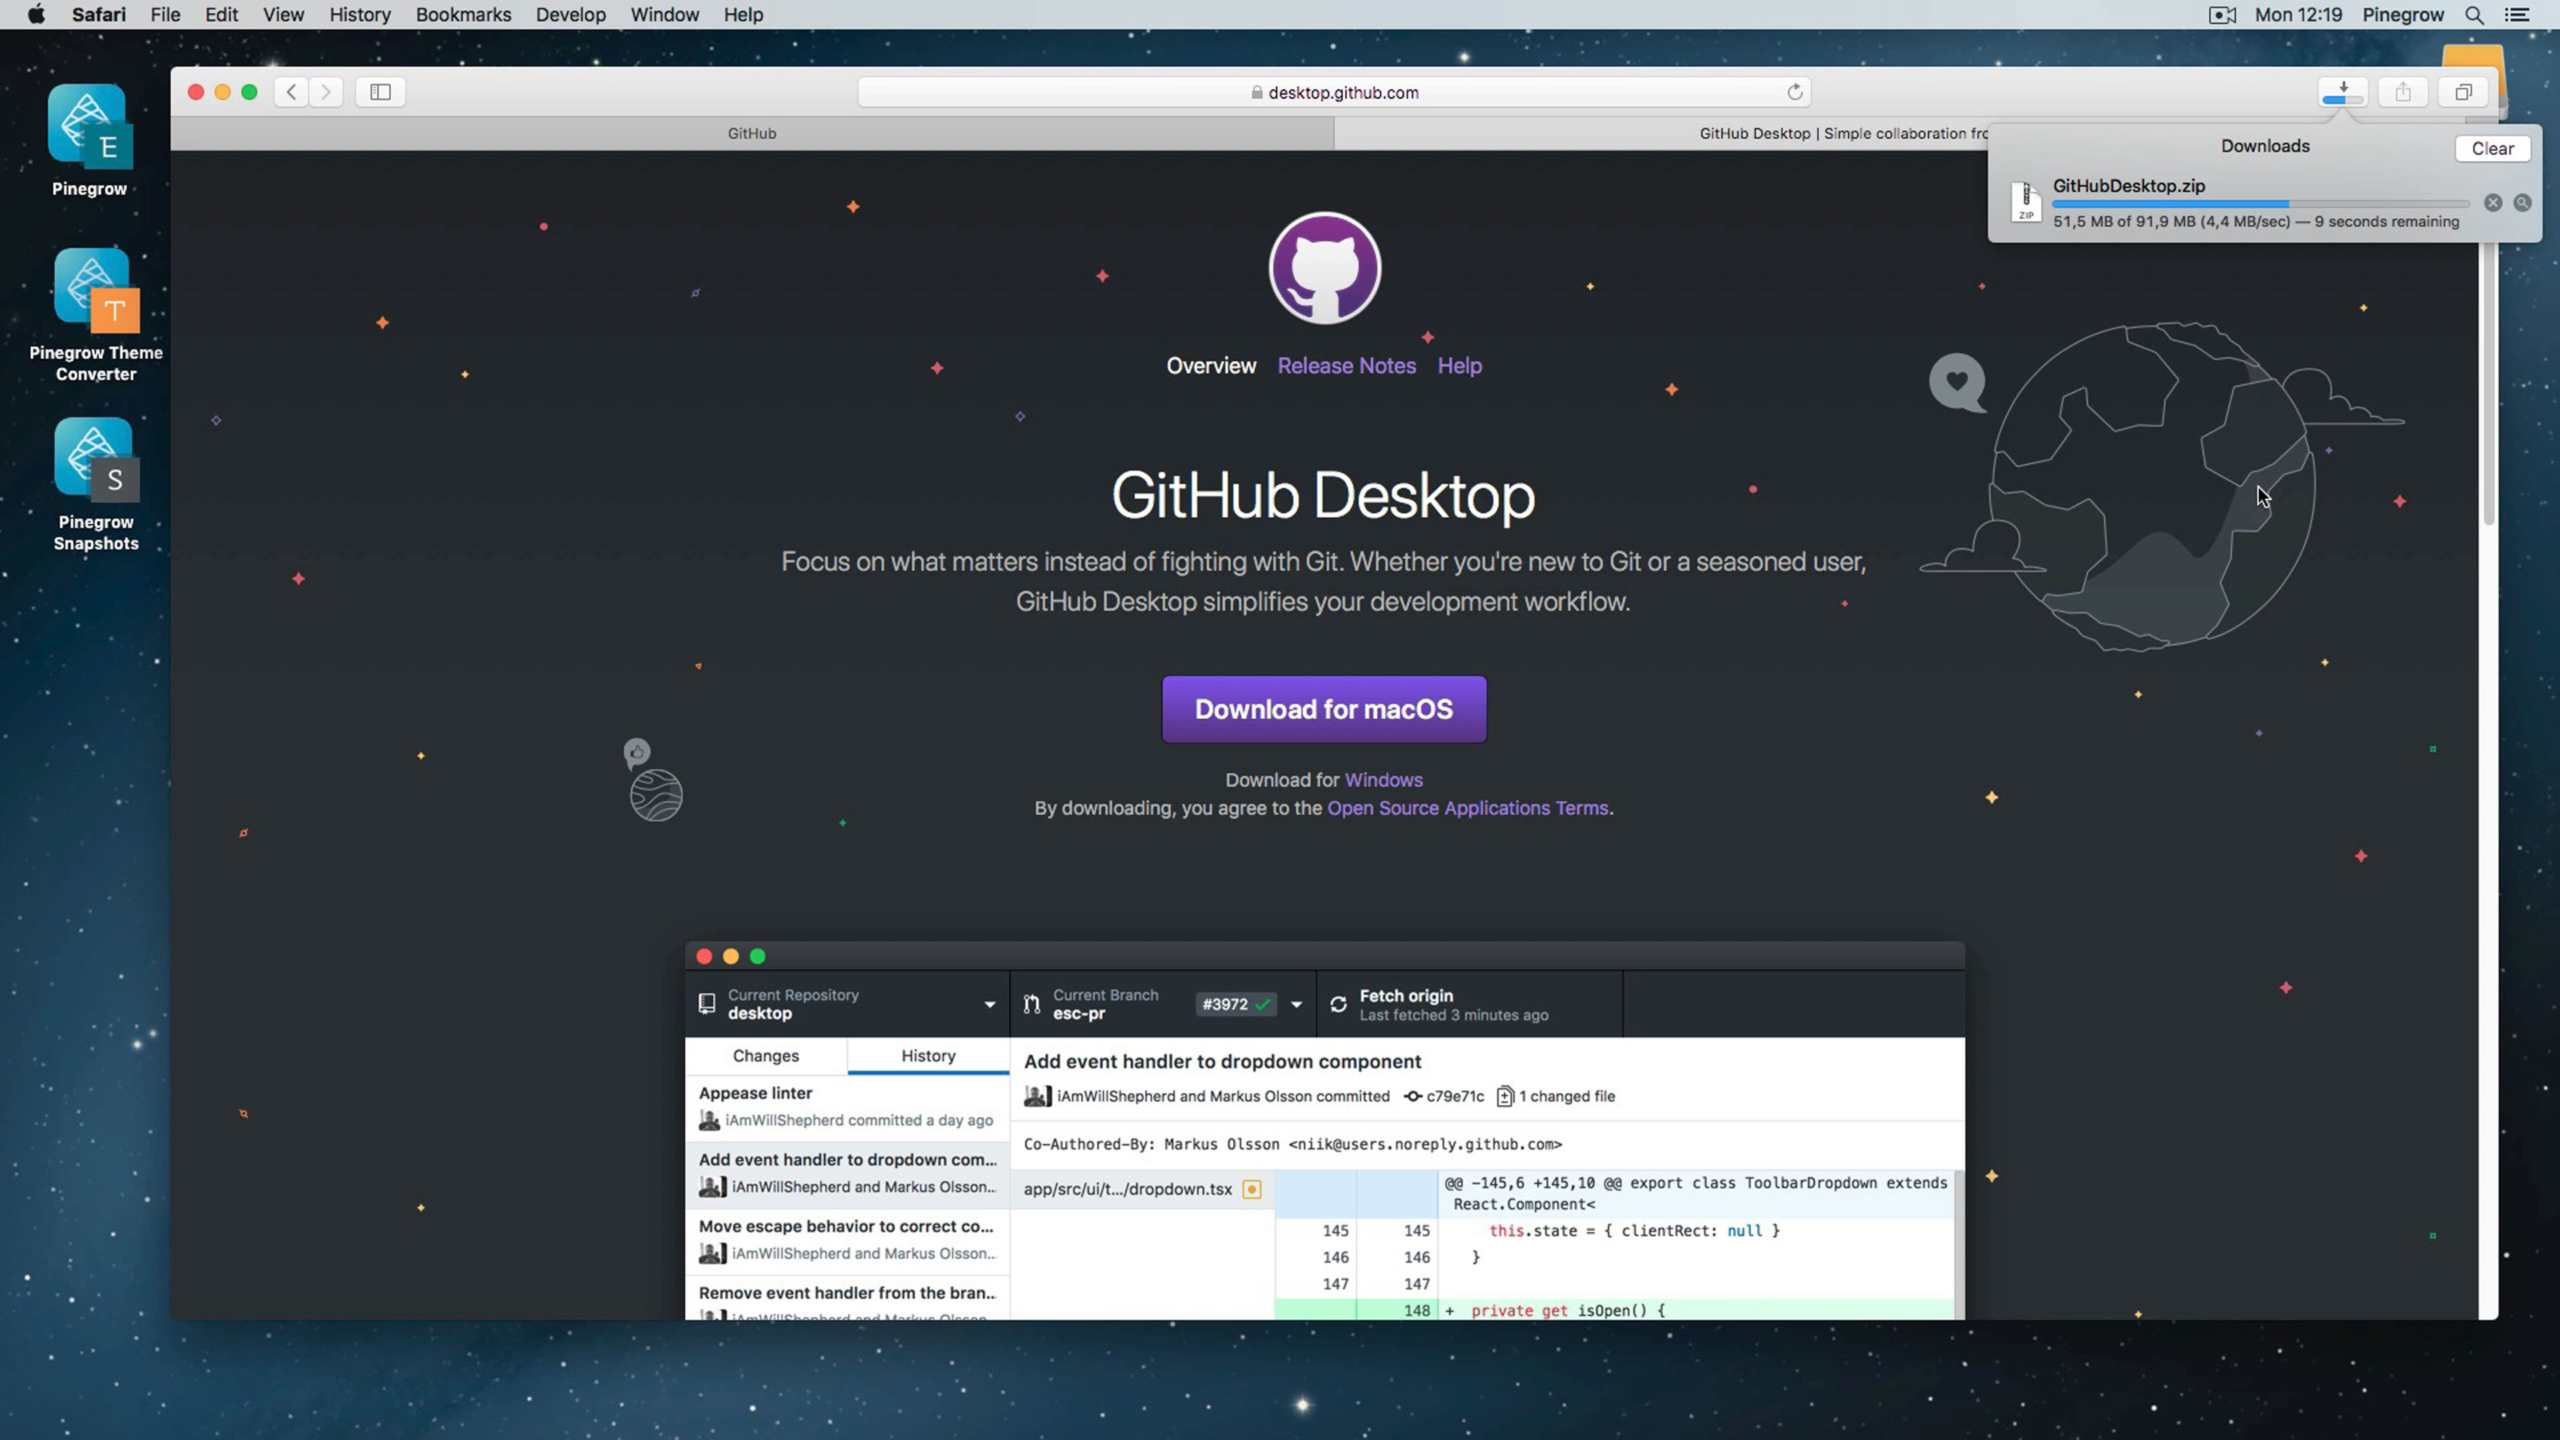 Download and Install the GitHub Desktop client